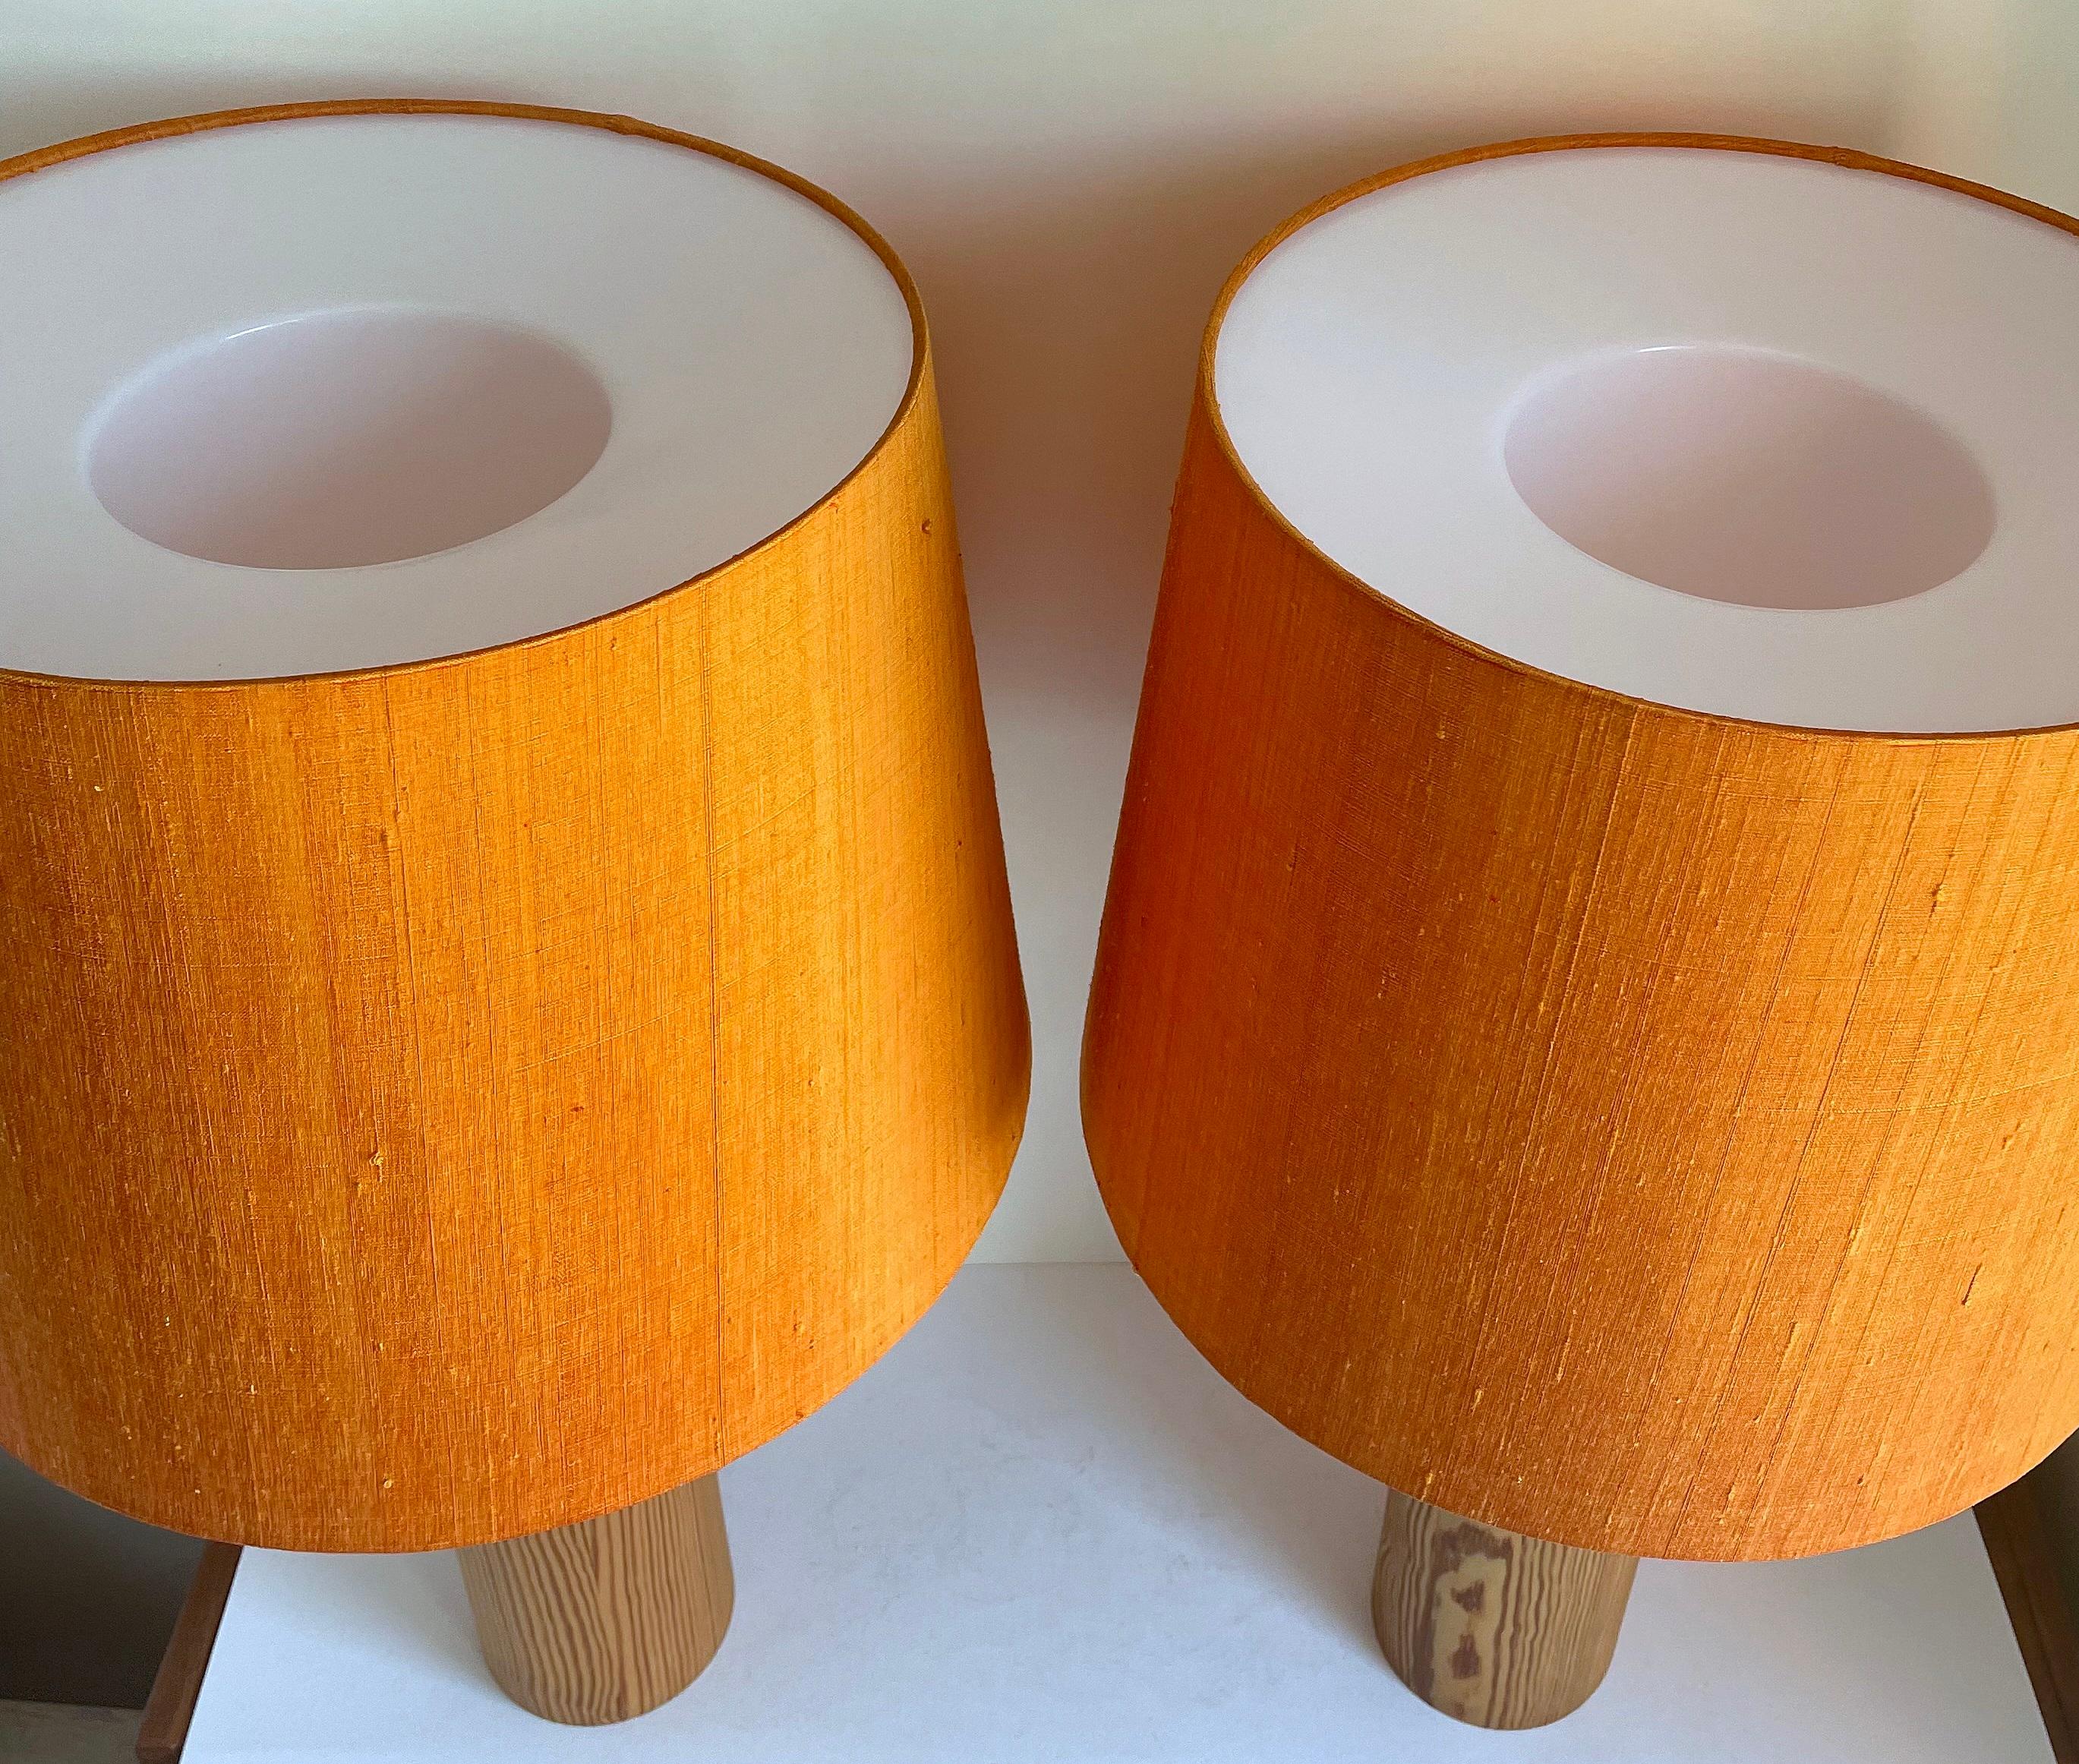 Mid-Century Modern Uno Kristiansson Table Lamps, Turned Solid Pine, Luxus Sweden, 1960s For Sale